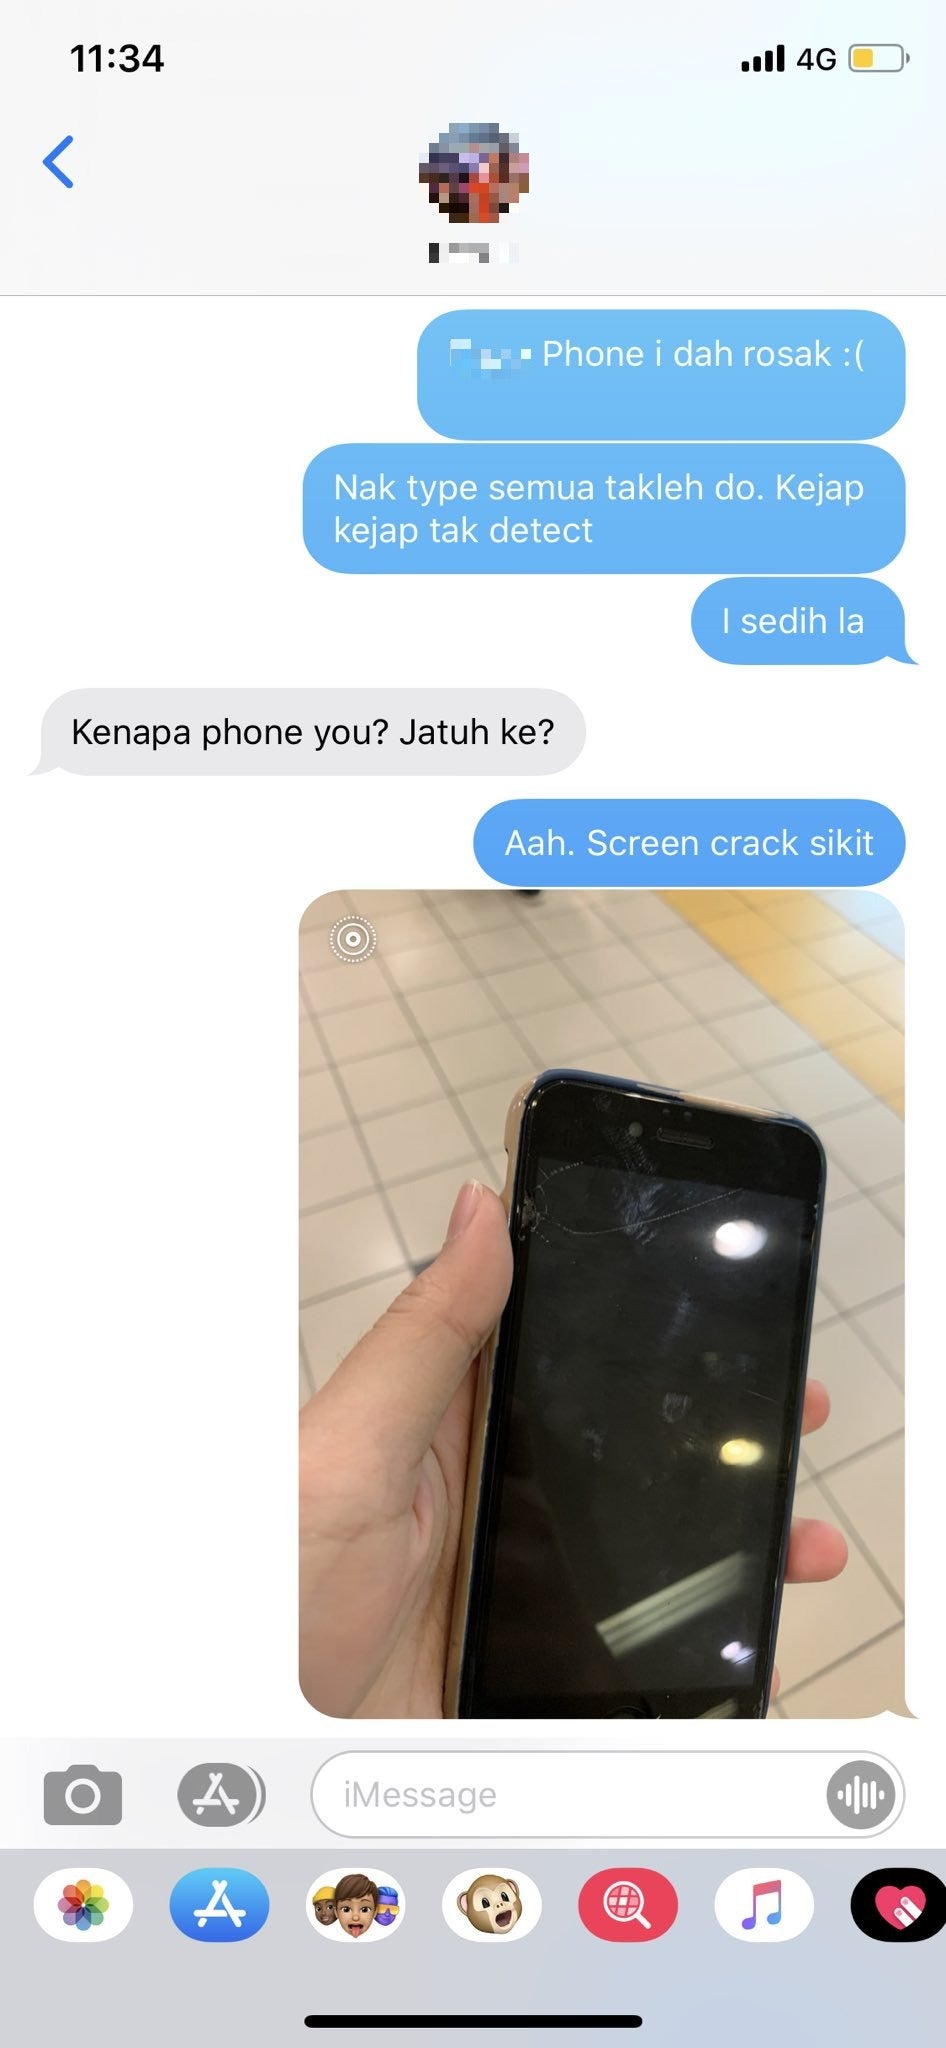 M'sian Girl Receives New iPhone 11 From Guy Best Friend After Her Old Phone Screen Cracks - WORLD OF BUZZ